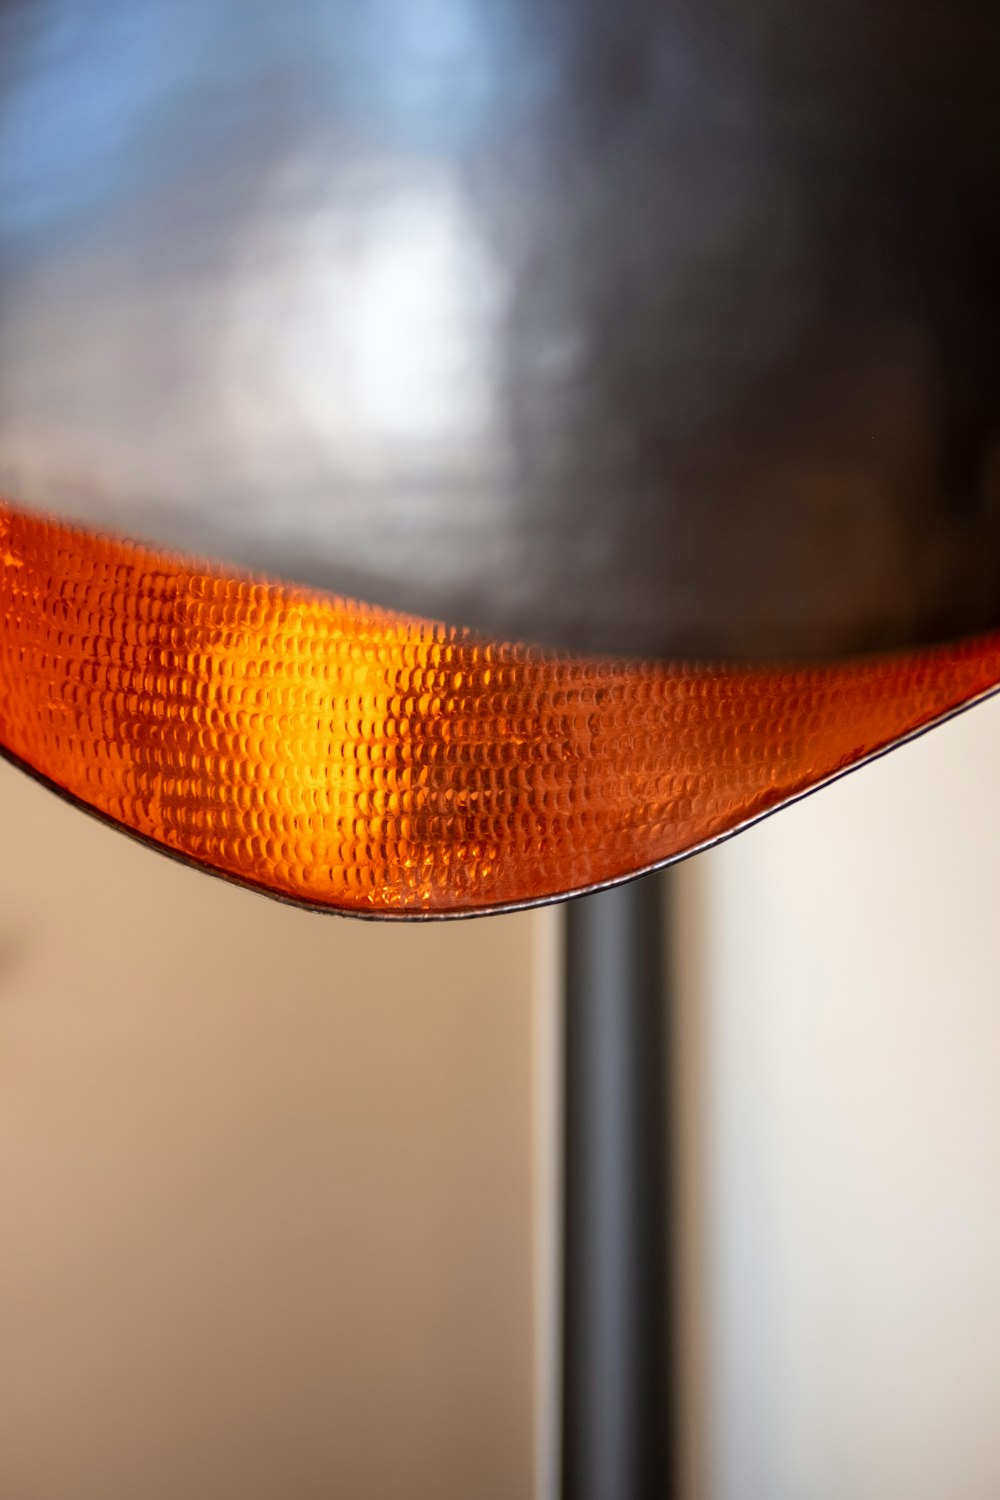 a close up of a metal object with a light on it